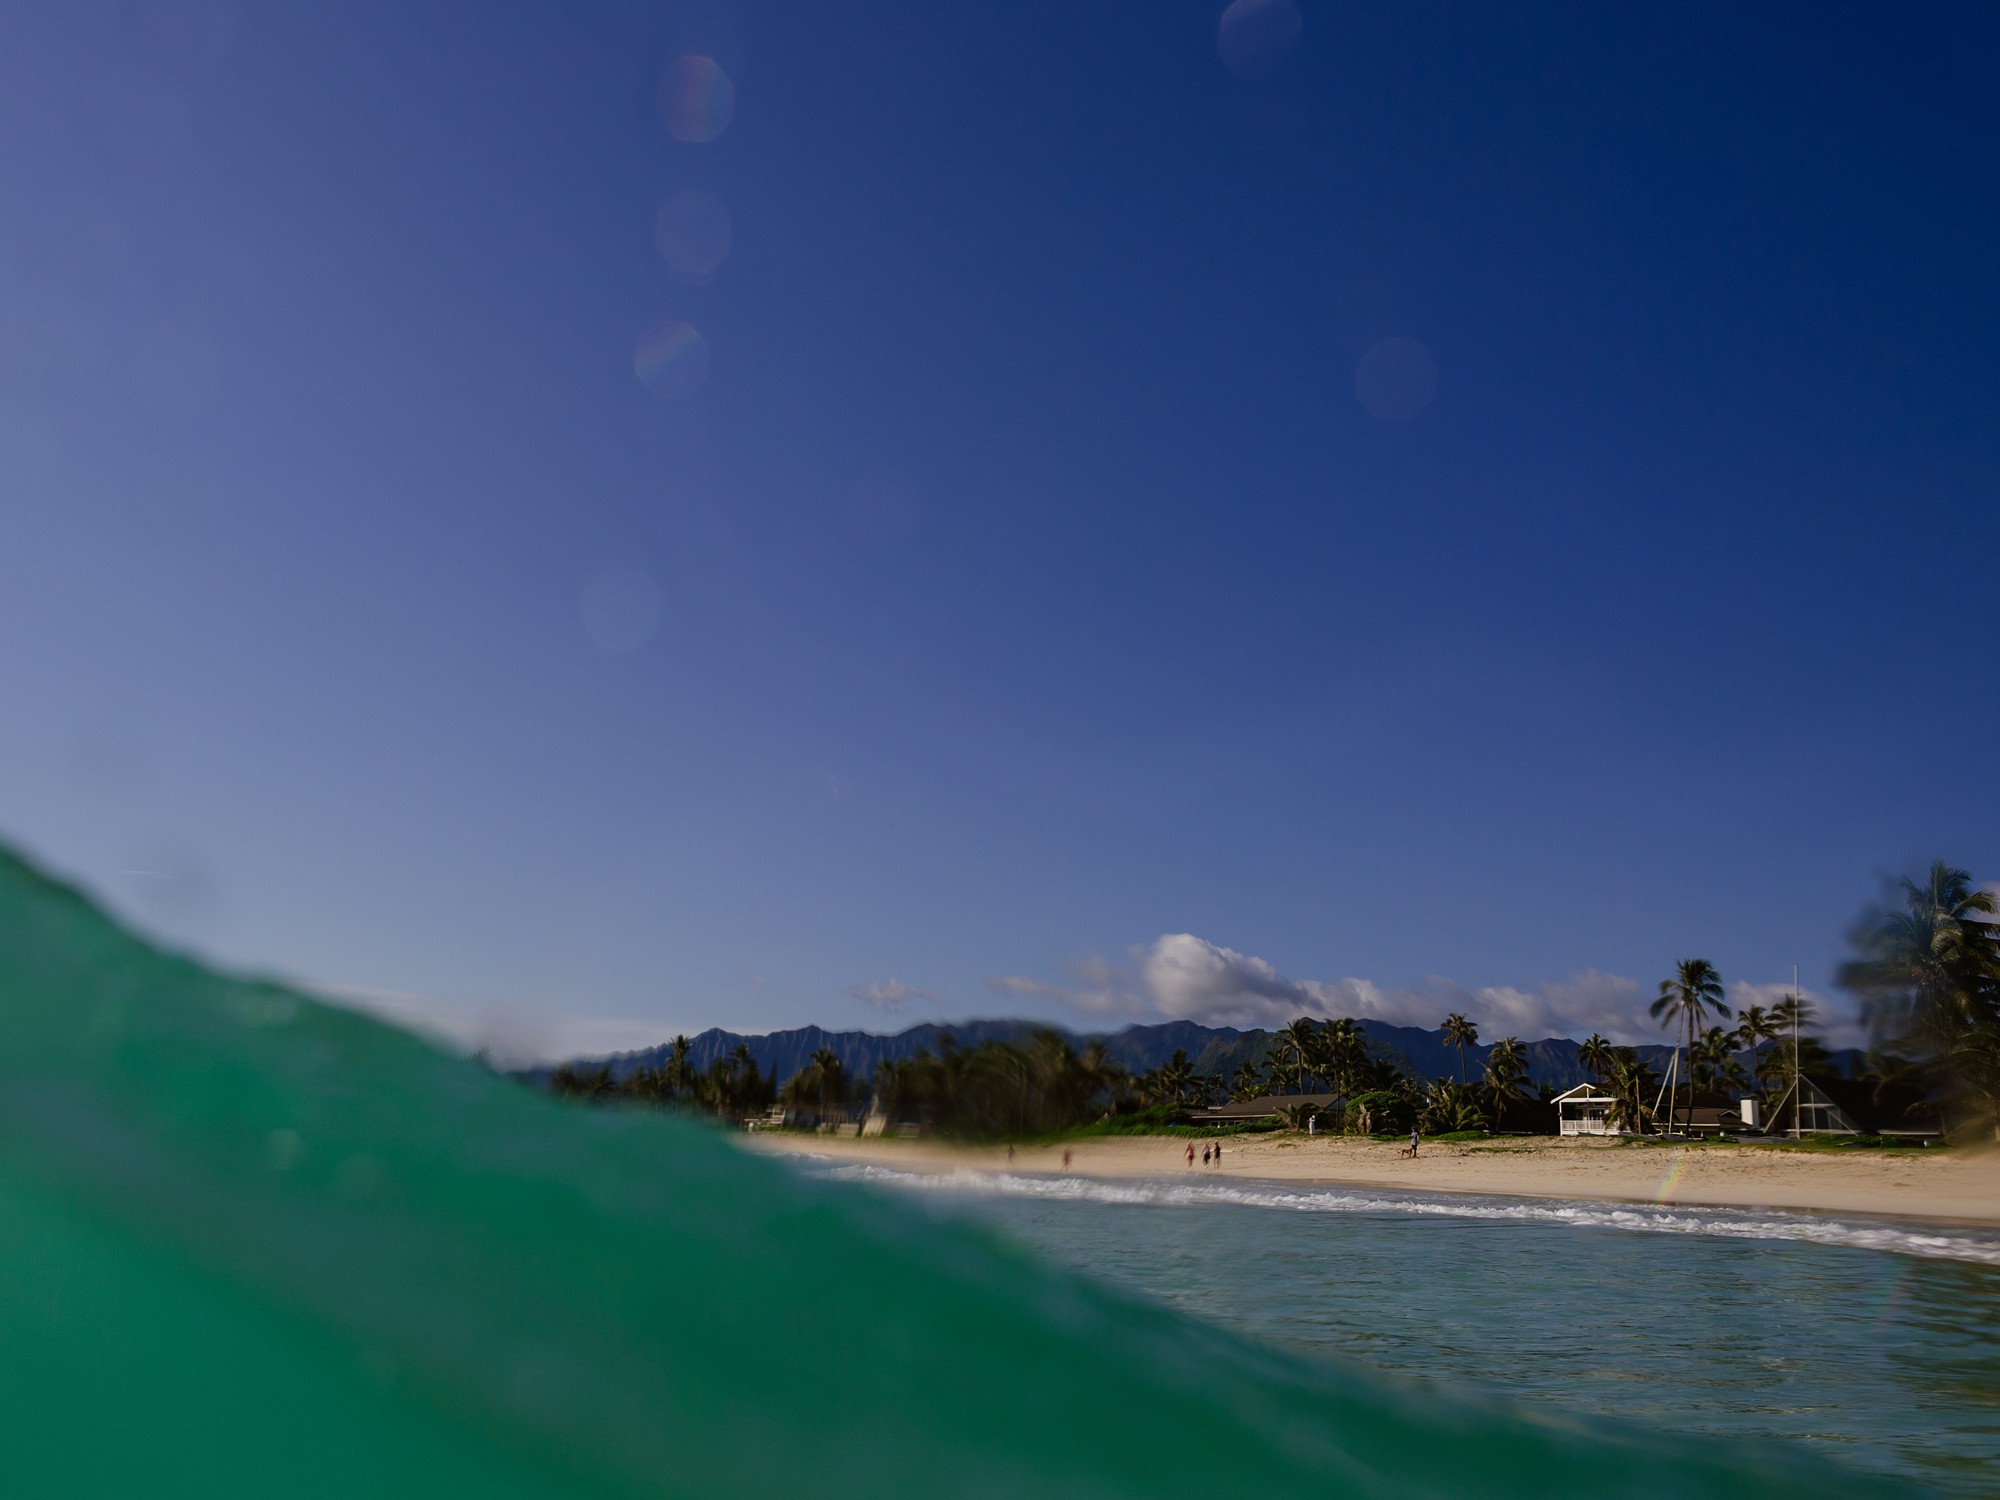 kailua beach as seen from the back of a wave on a clear day